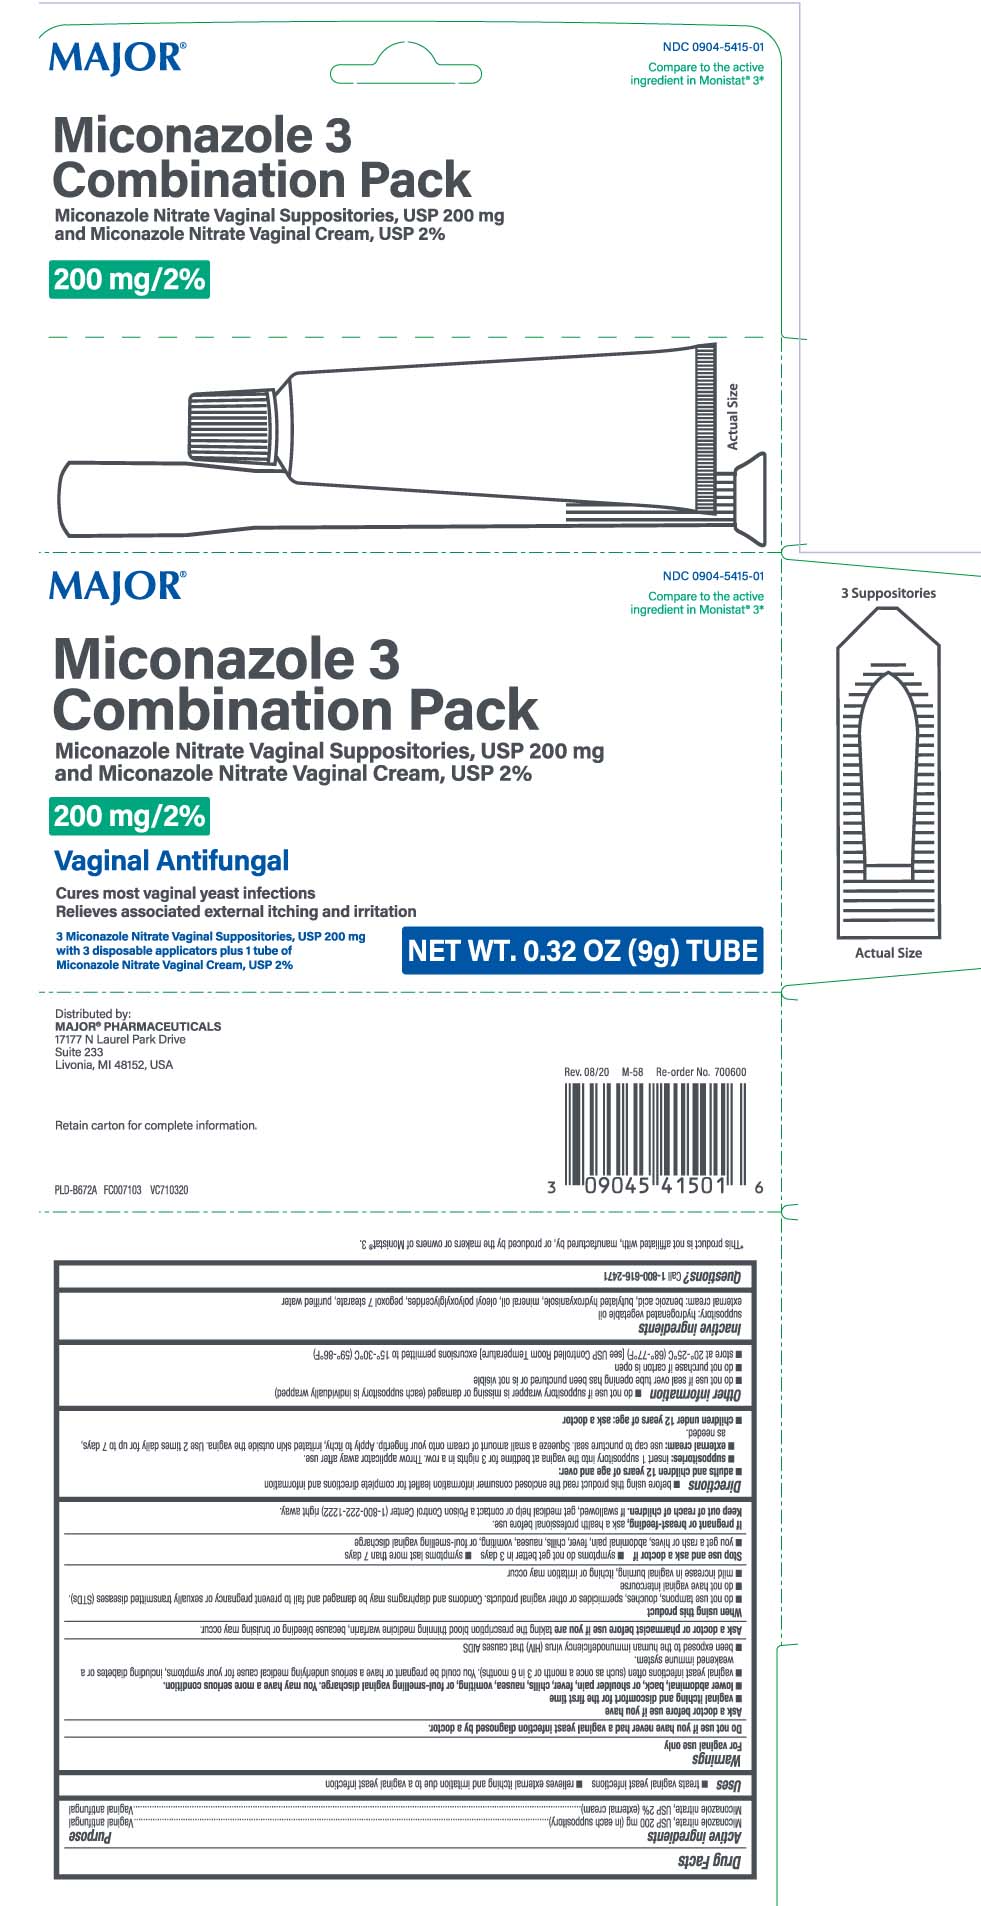 Miconazole nitrate, USP 200 mg (in each suppository) Miconazole nitrate, USP 2% (external Cream